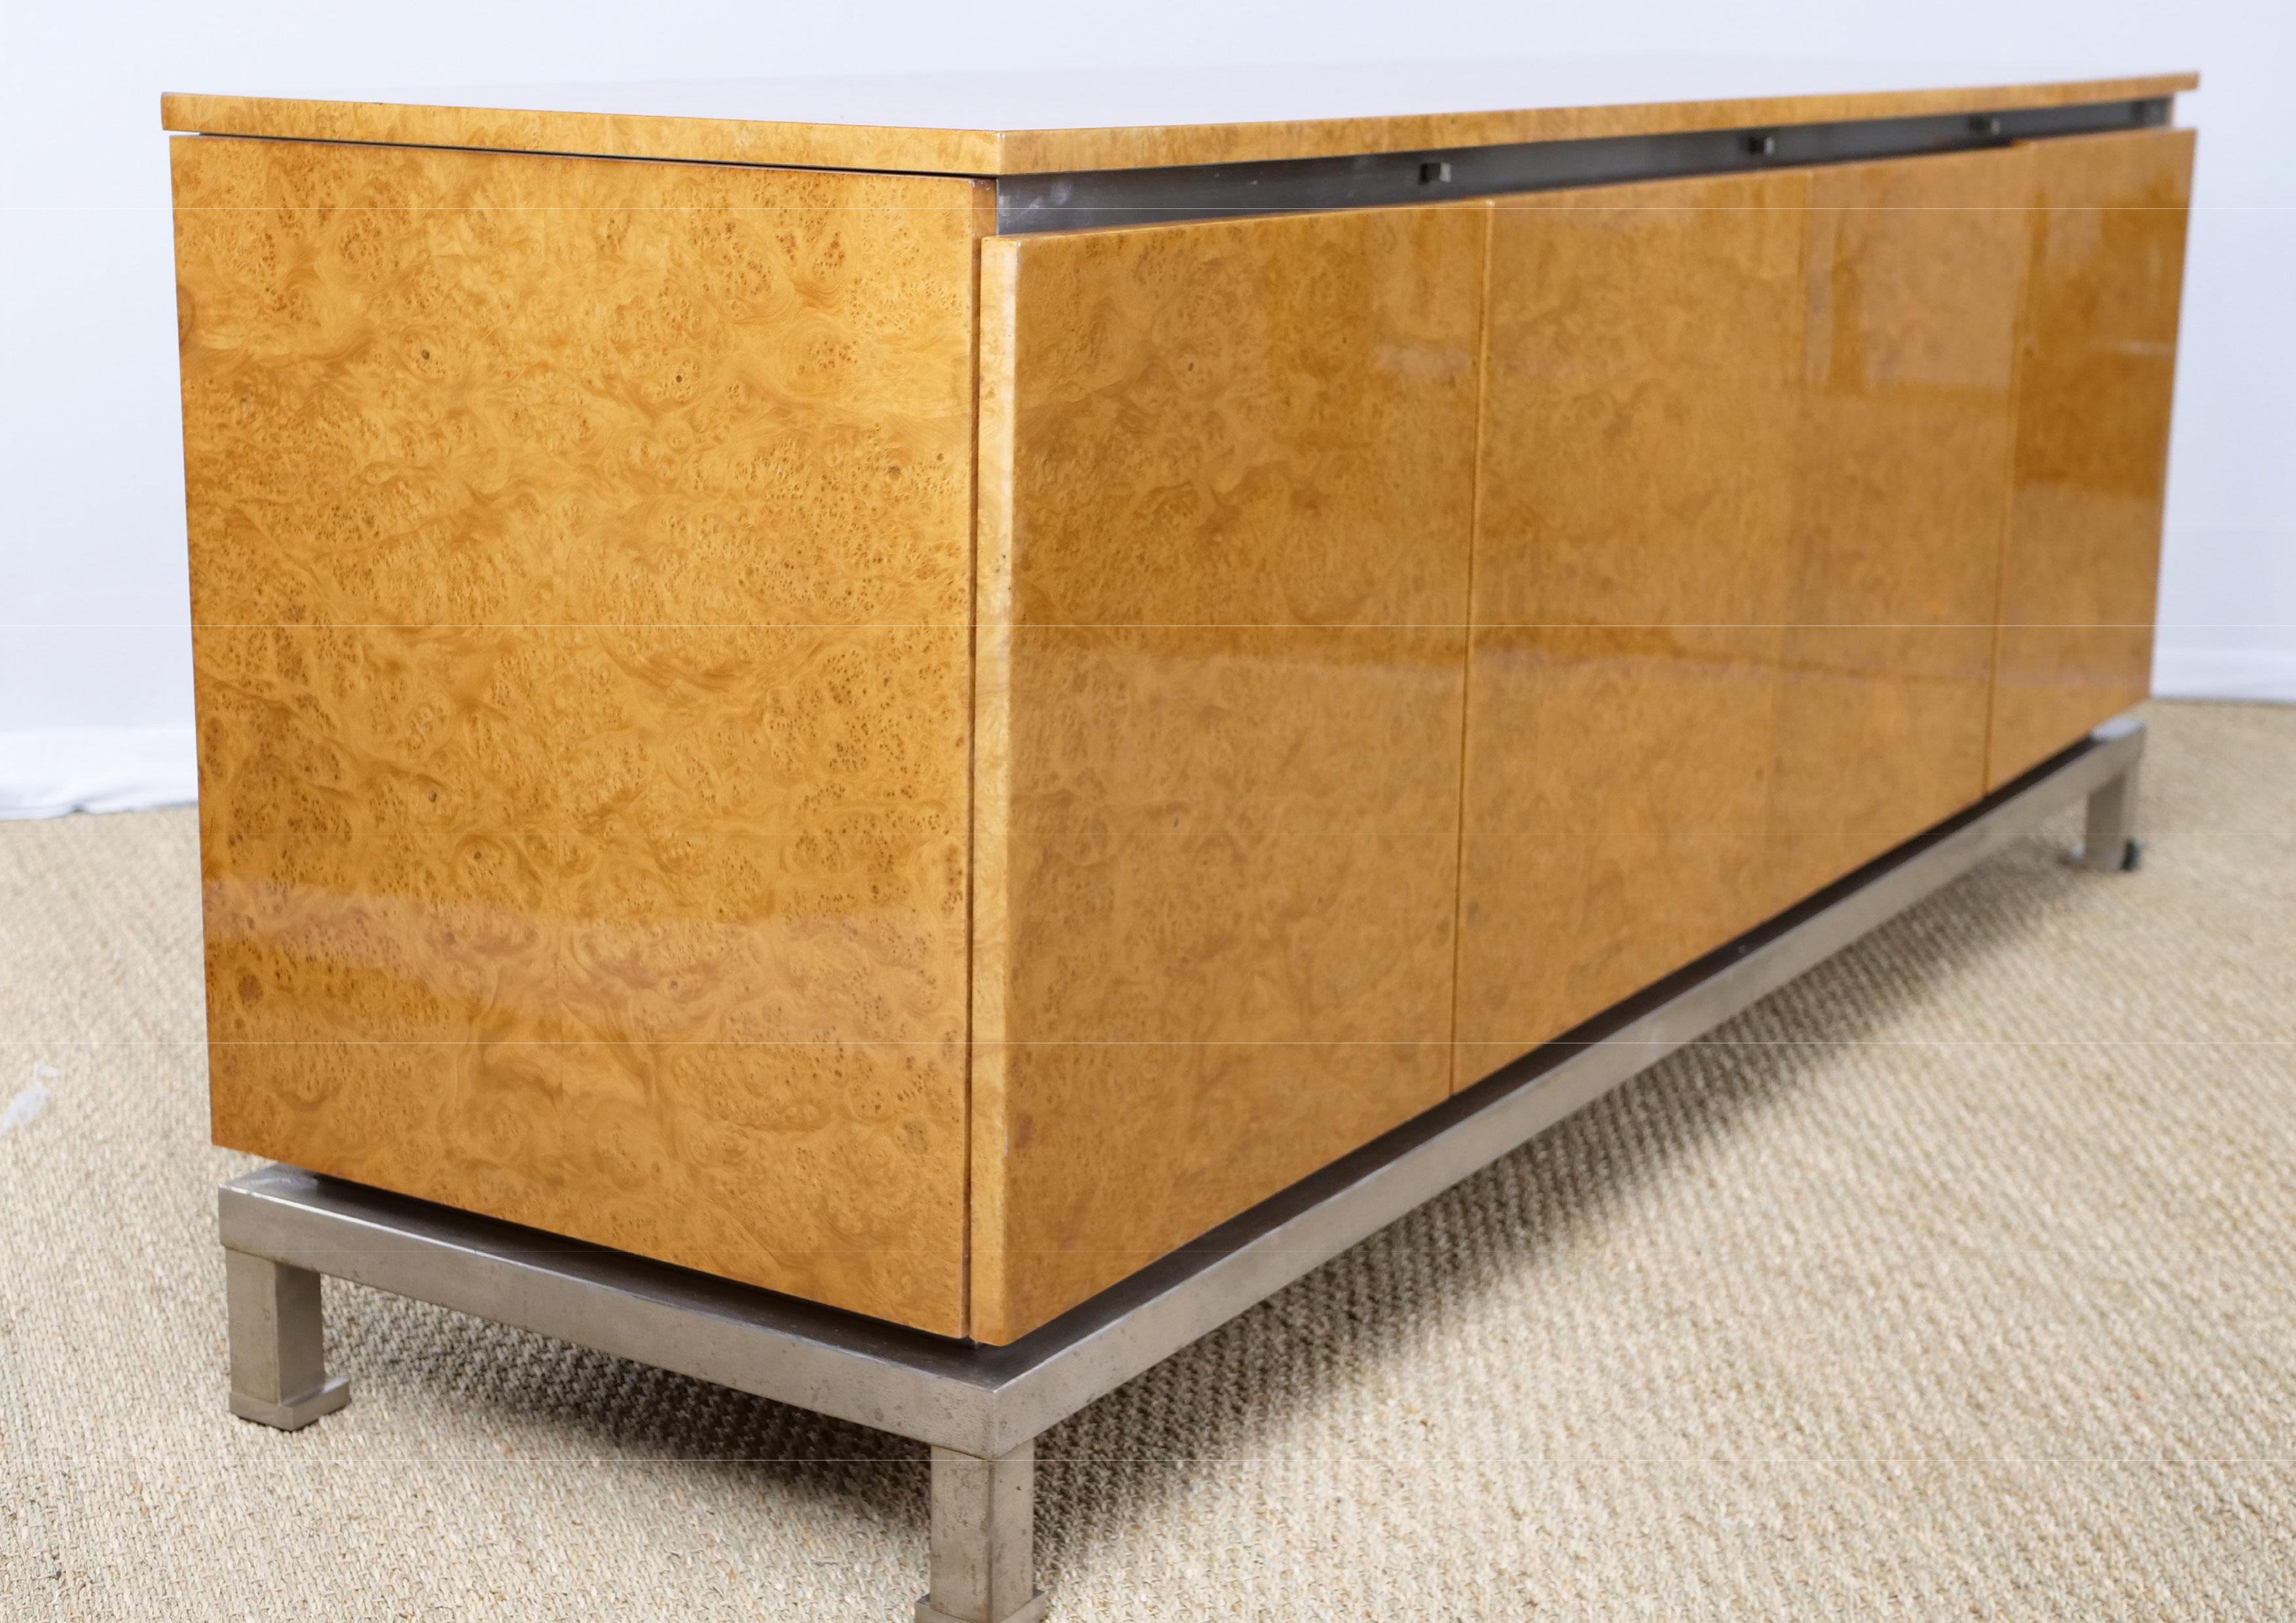 Guy LEFEVRE for Maison Jansen, large sideboard in elm burl and brushed steel
good general condition, small ding on tray (see photo)